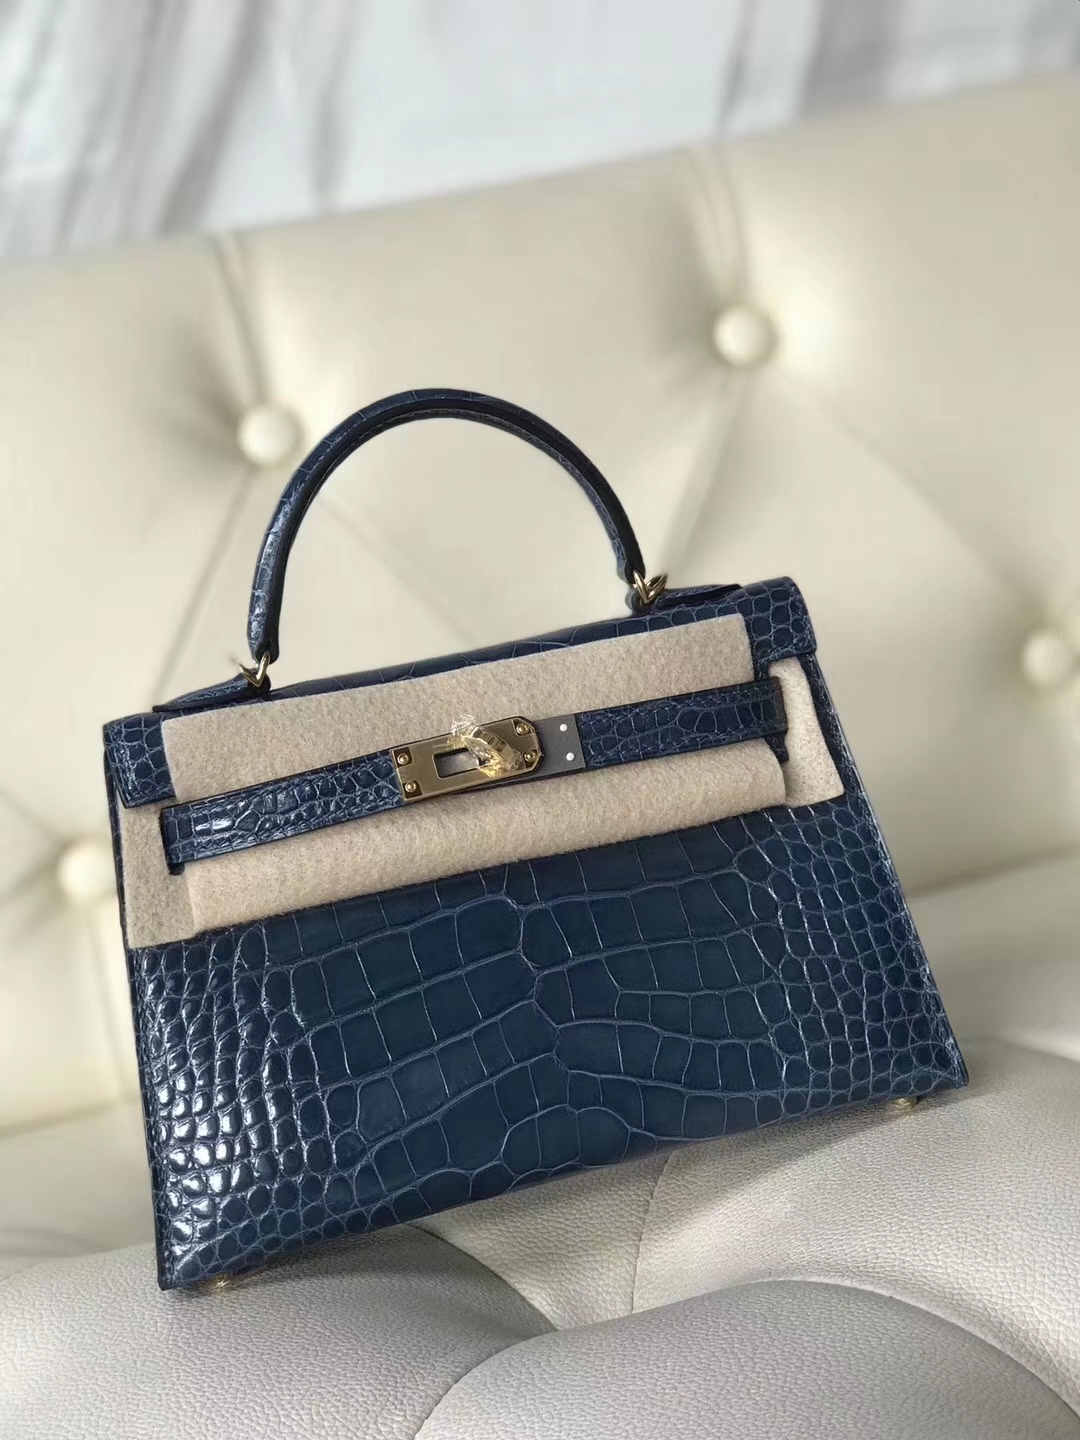 New Arrival Hermes Shiny Crocodile Minikelly-2 Evening Bag in 7N Blue ...